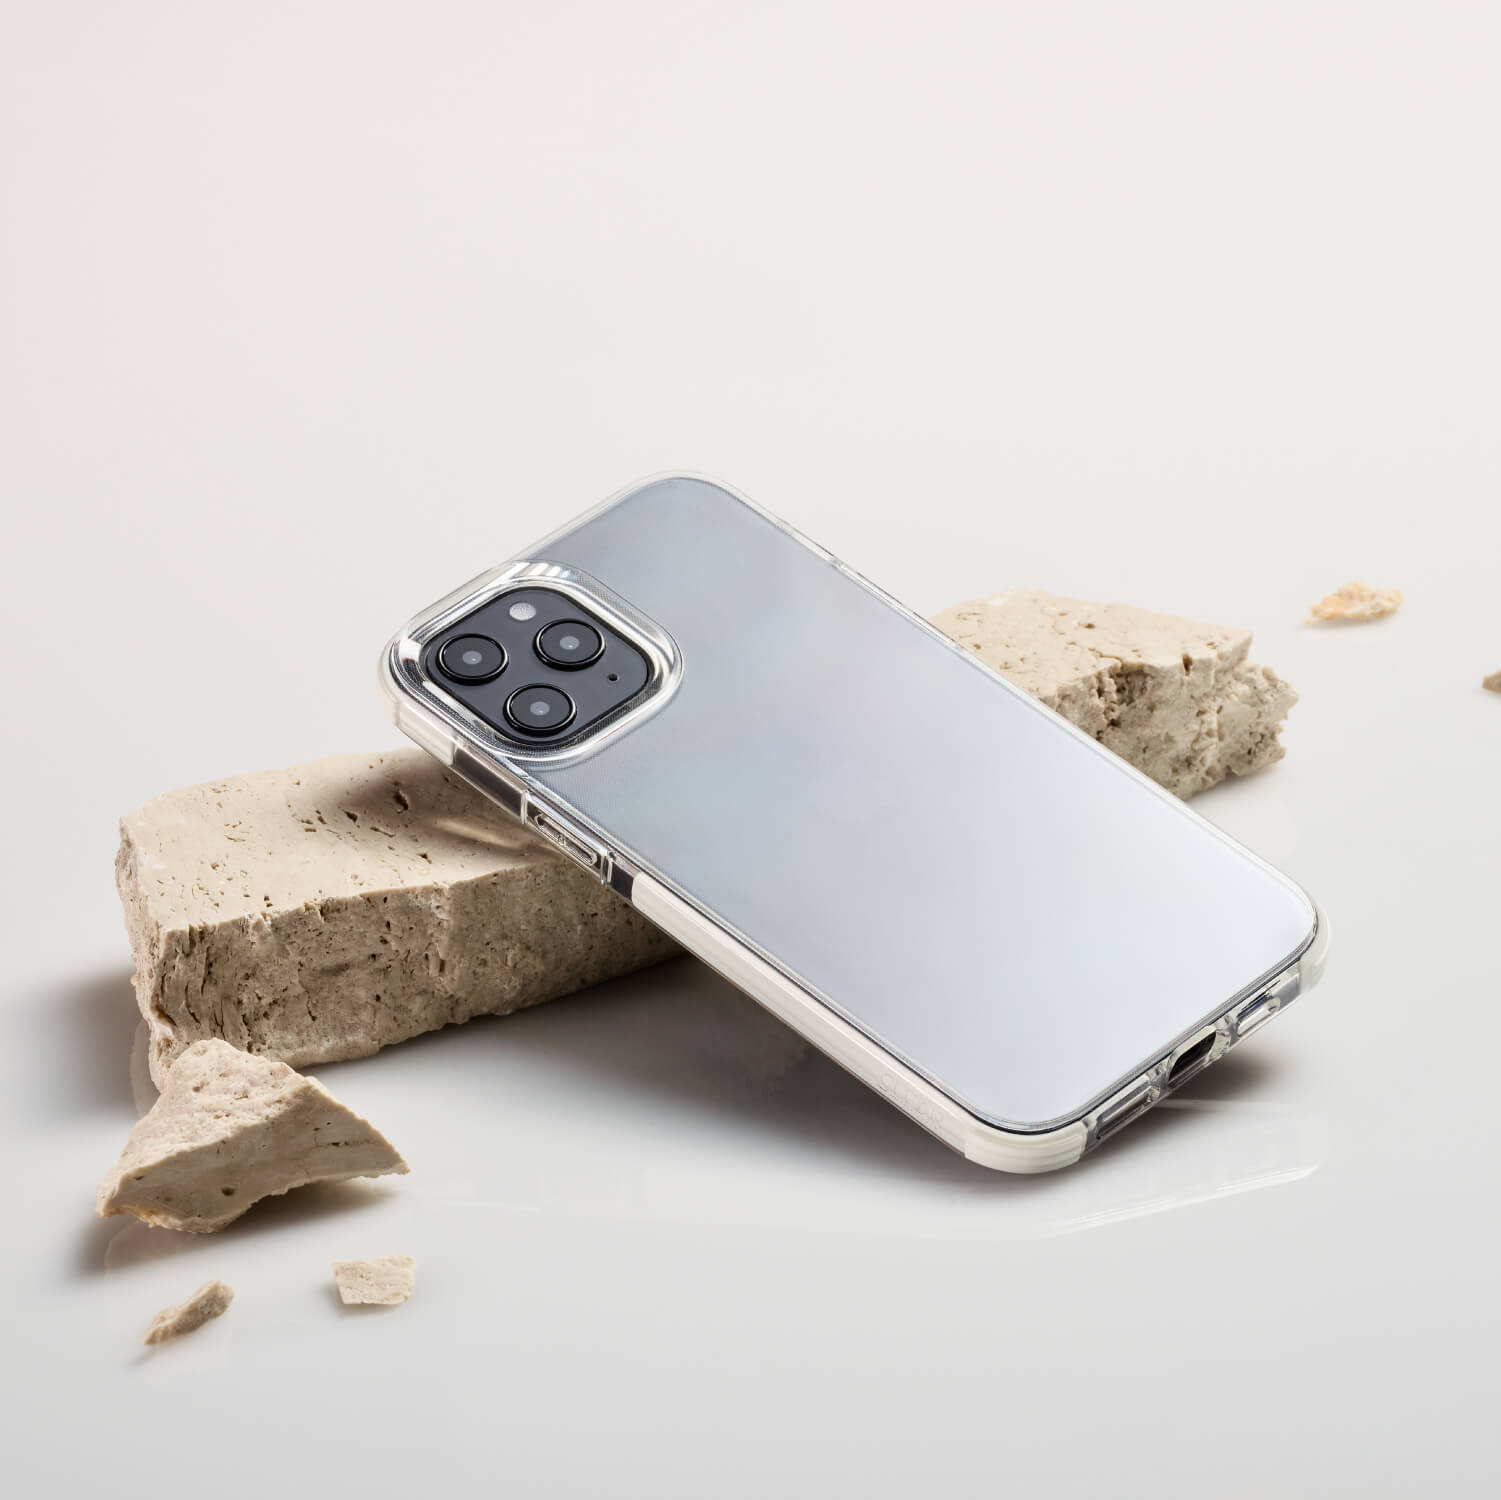 The Raptic Clear iPhone 12 Mini case is sitting on top of a piece of concrete, providing 2-metre drop protection.